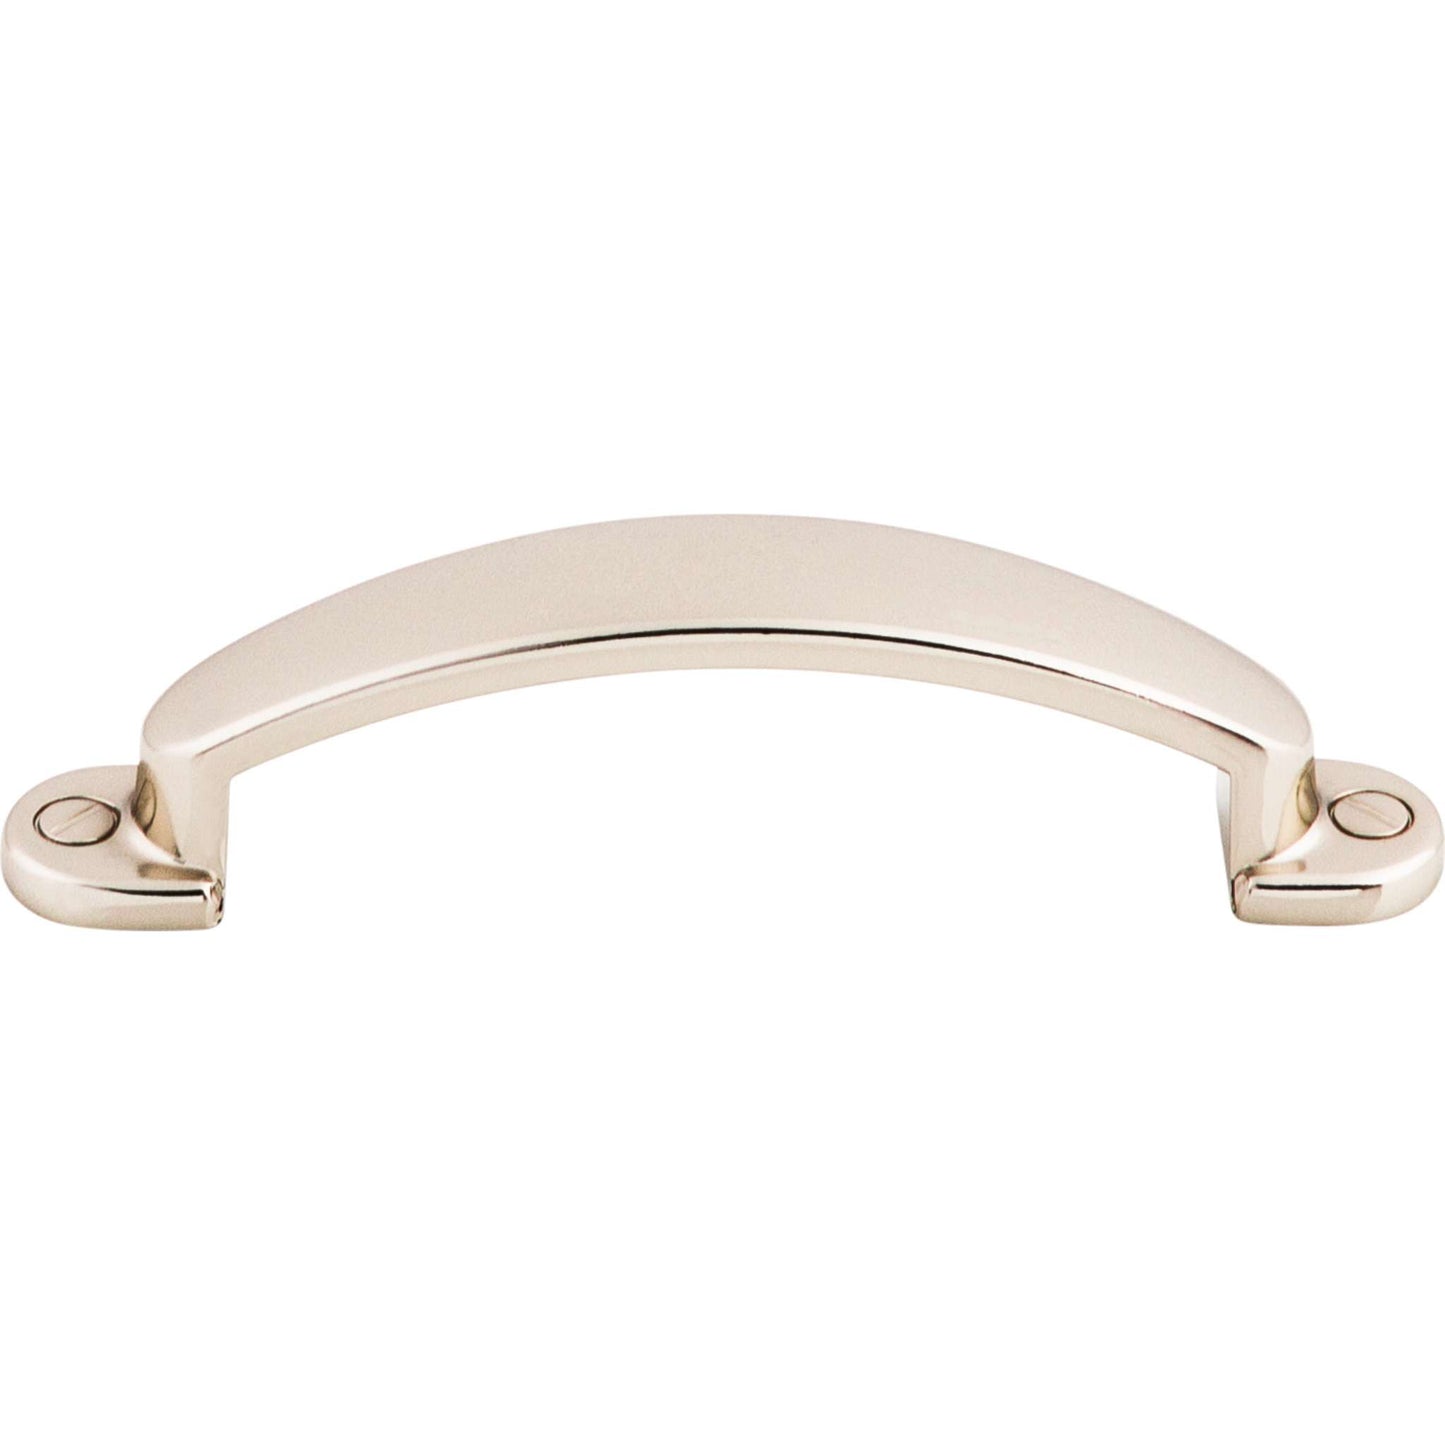 Top Knobs - Arendal Pull